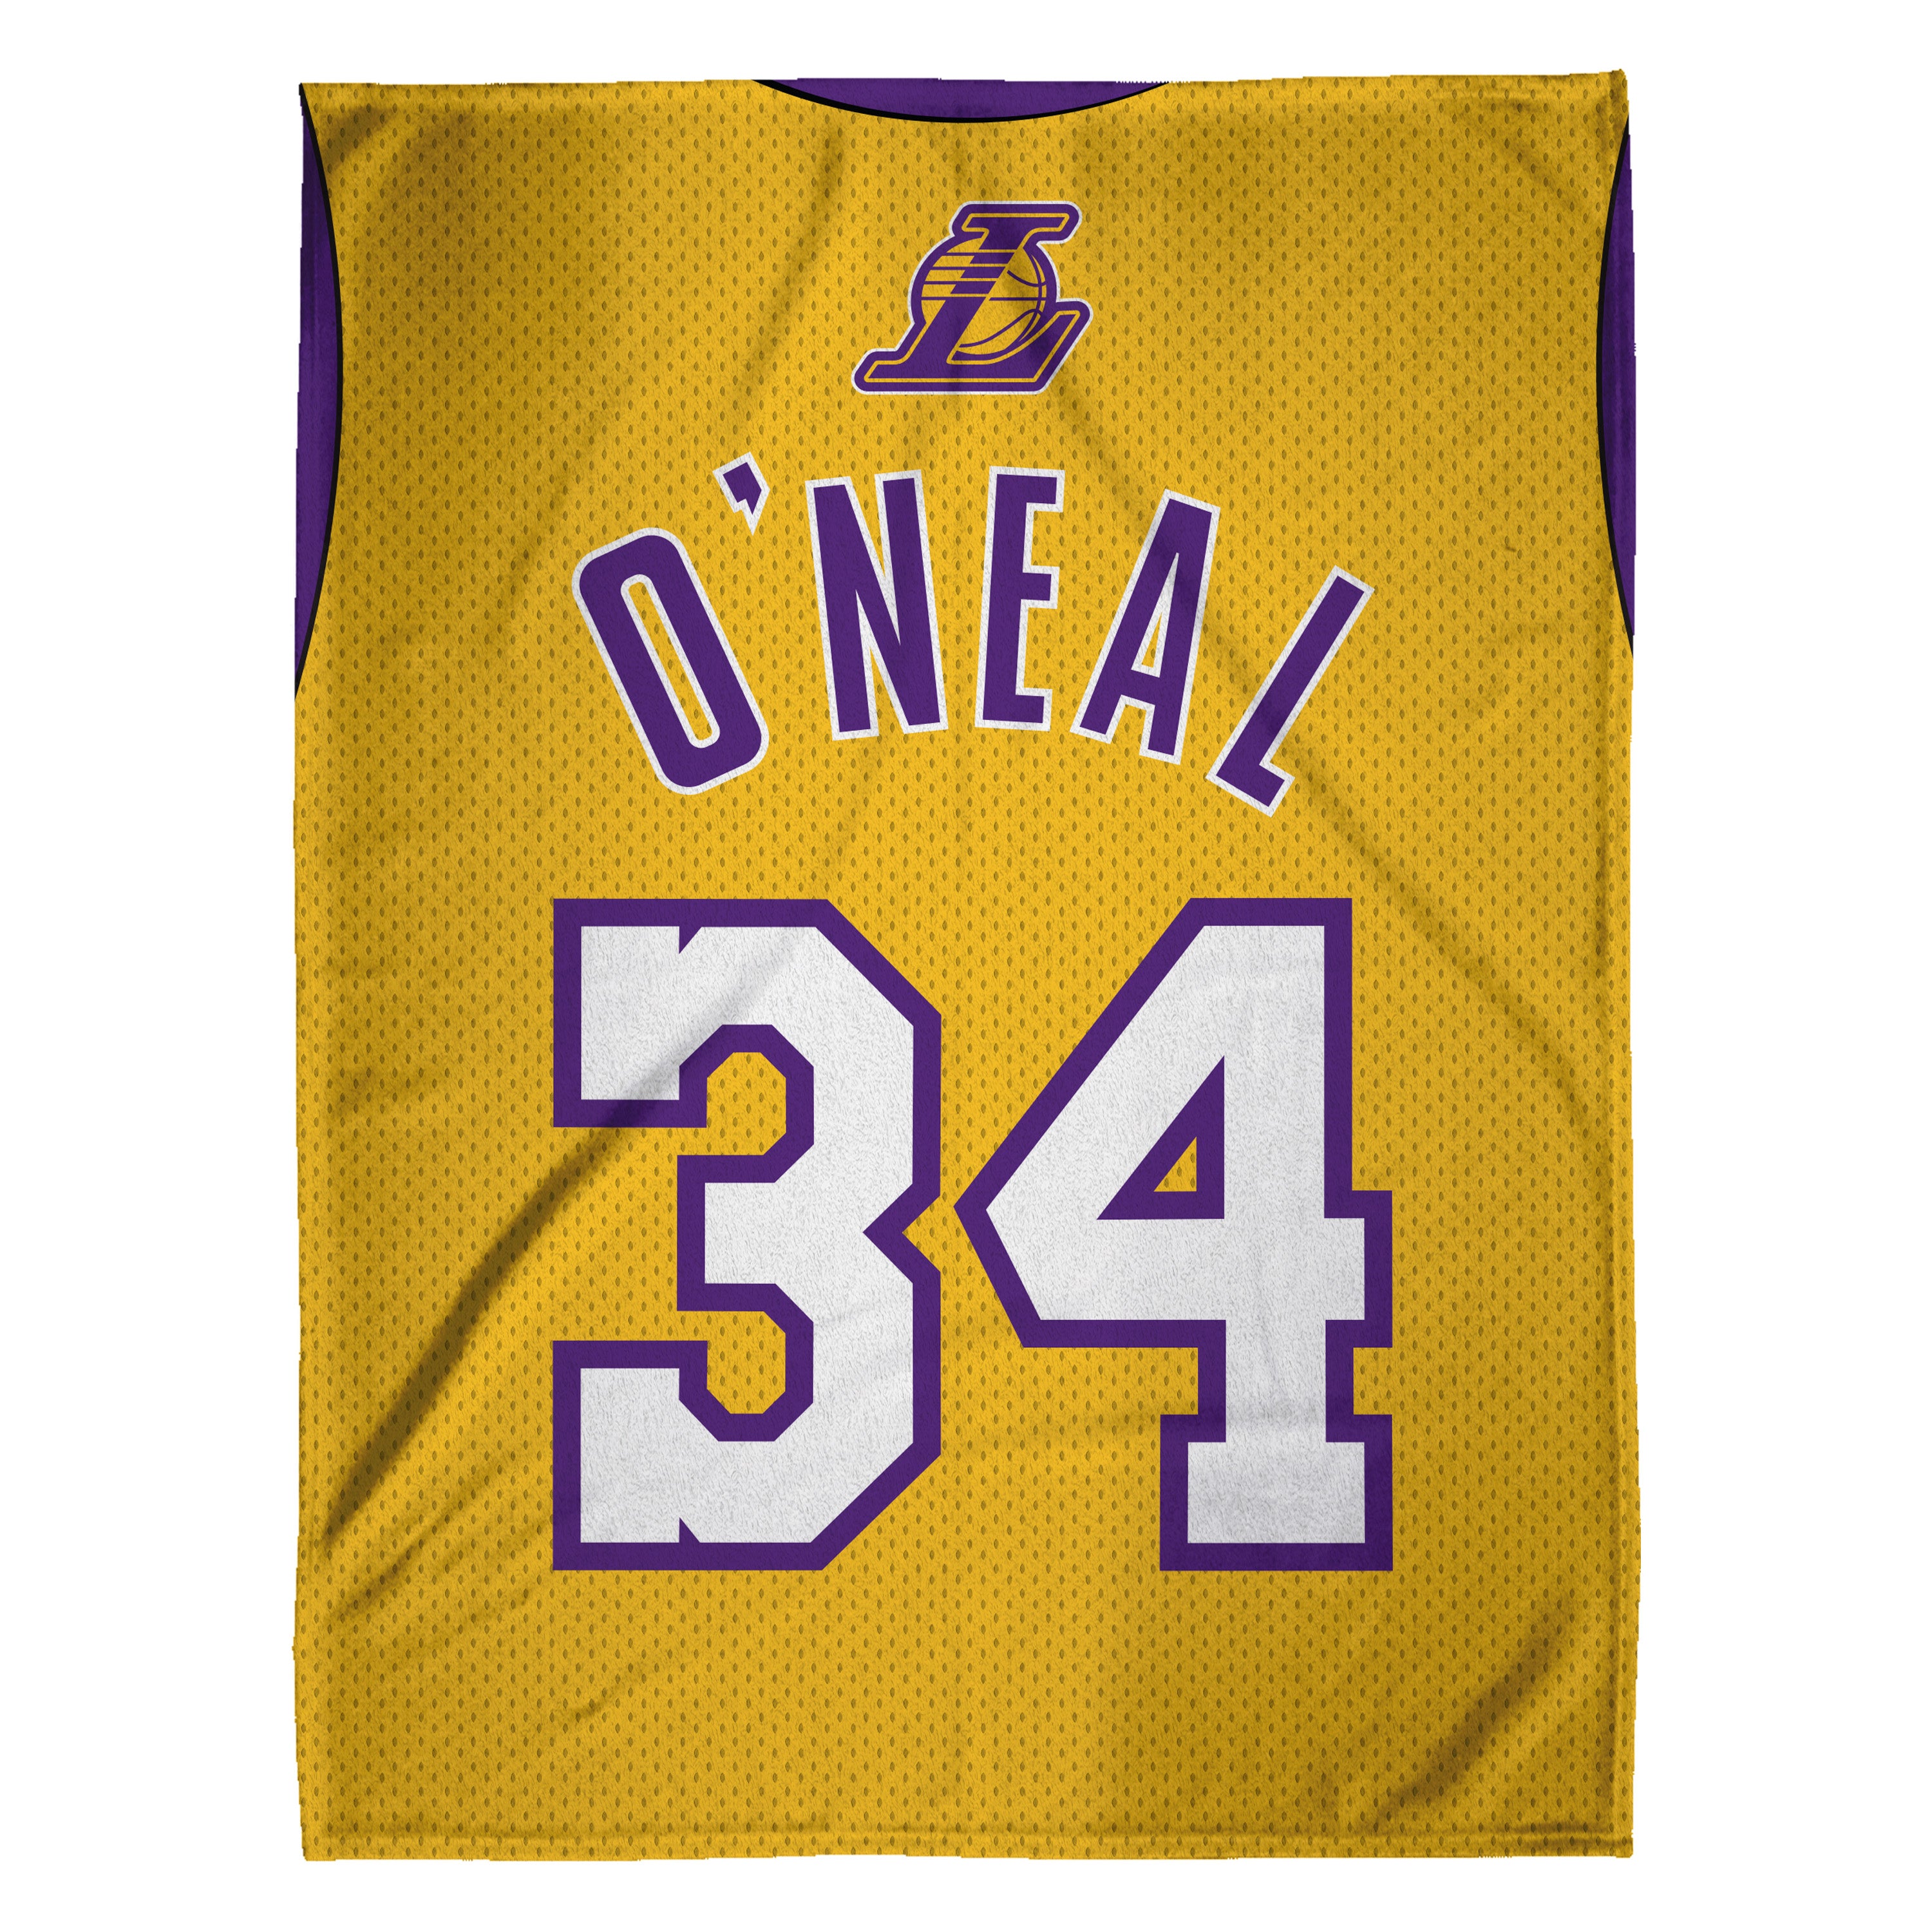 Buy Shaquille O'Neal Jersey from the Lakers